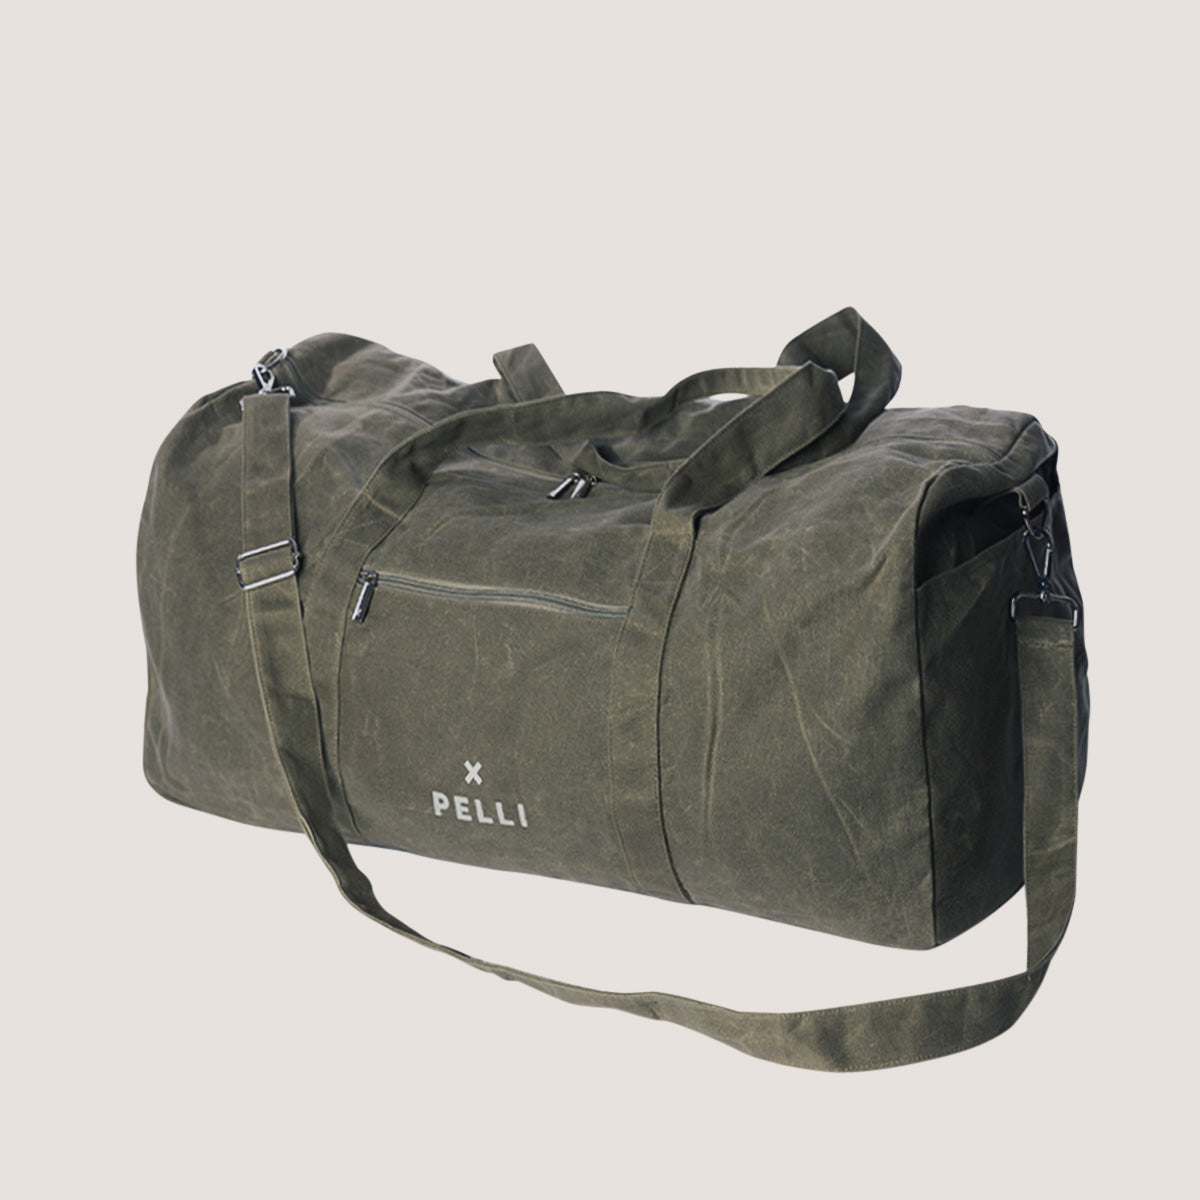 Load image into Gallery viewer, large army duffle bags for men
